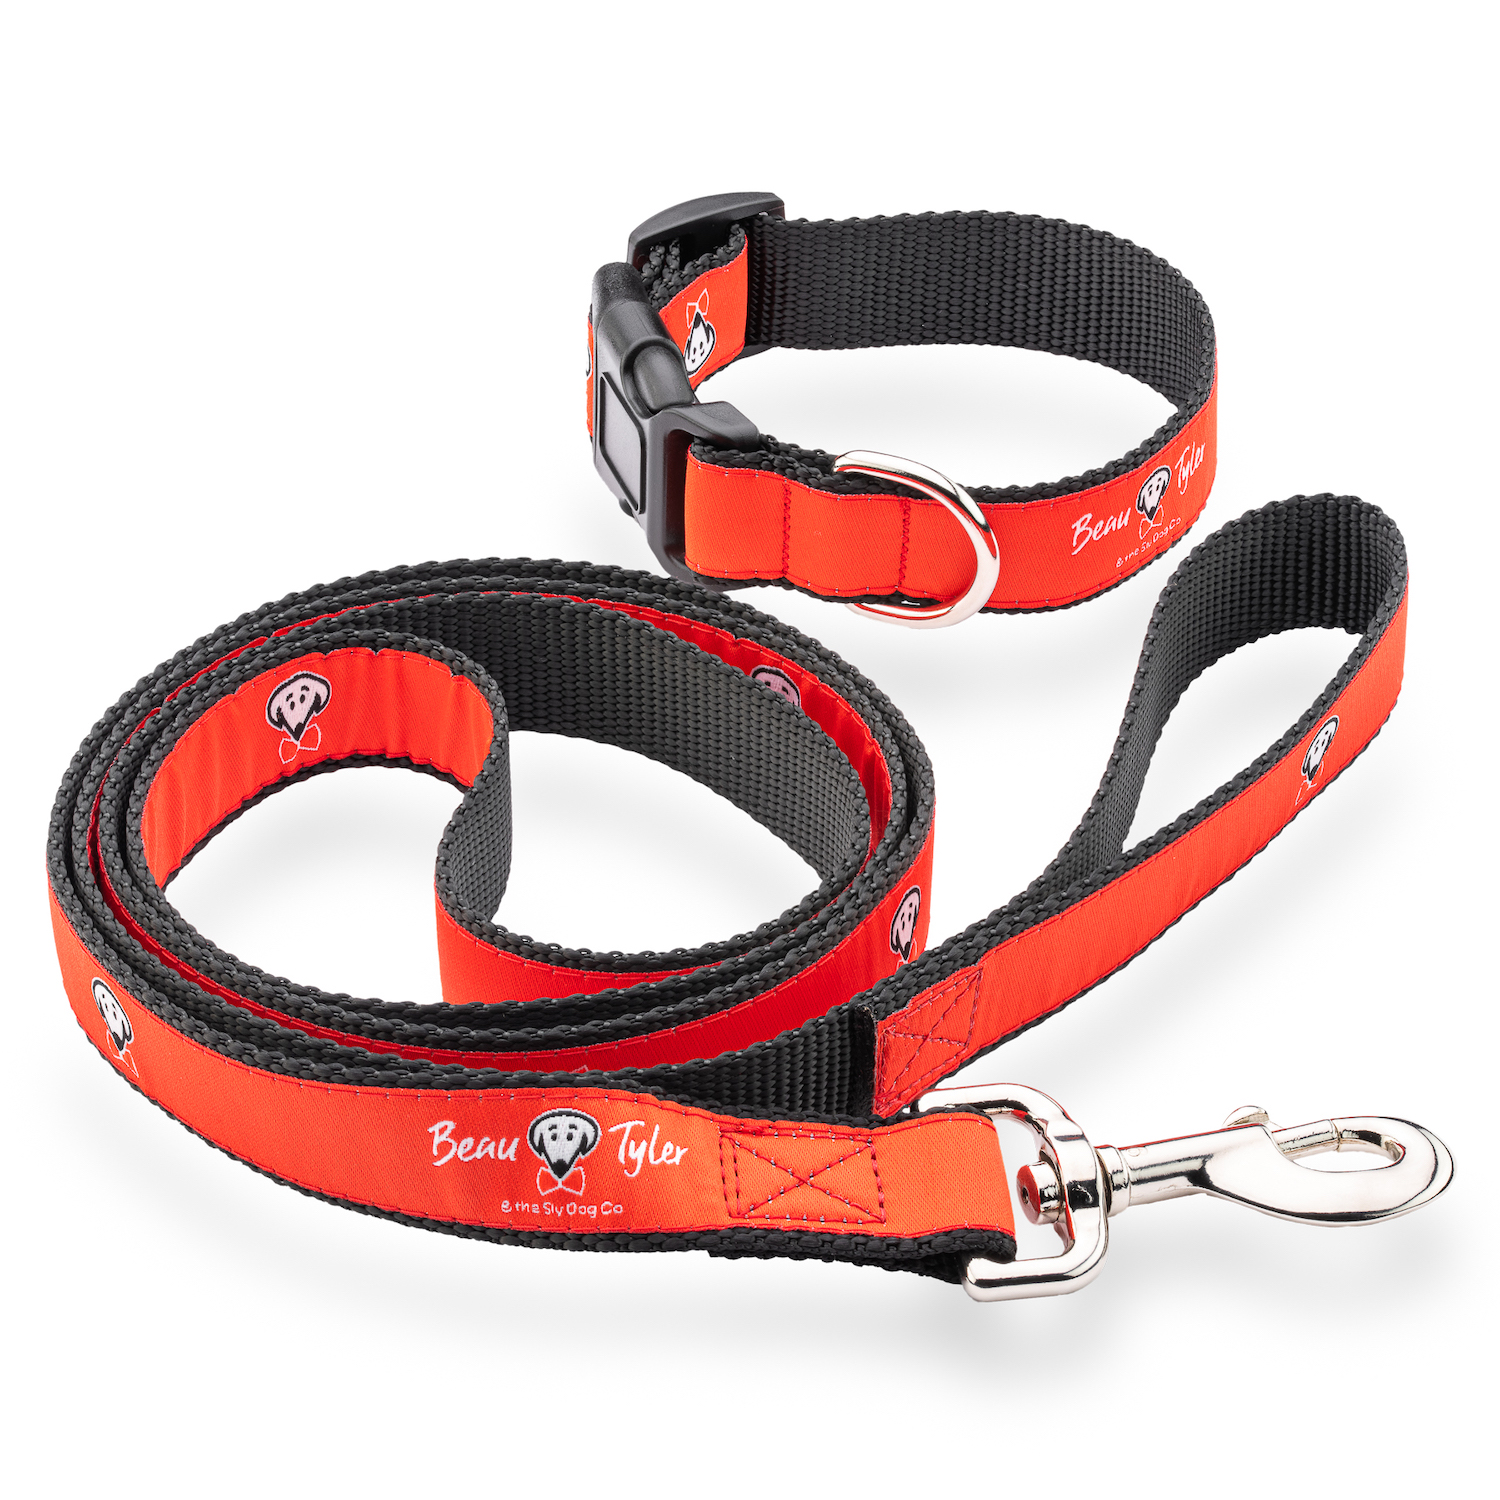 Beau Tyler pet collar and leash set red